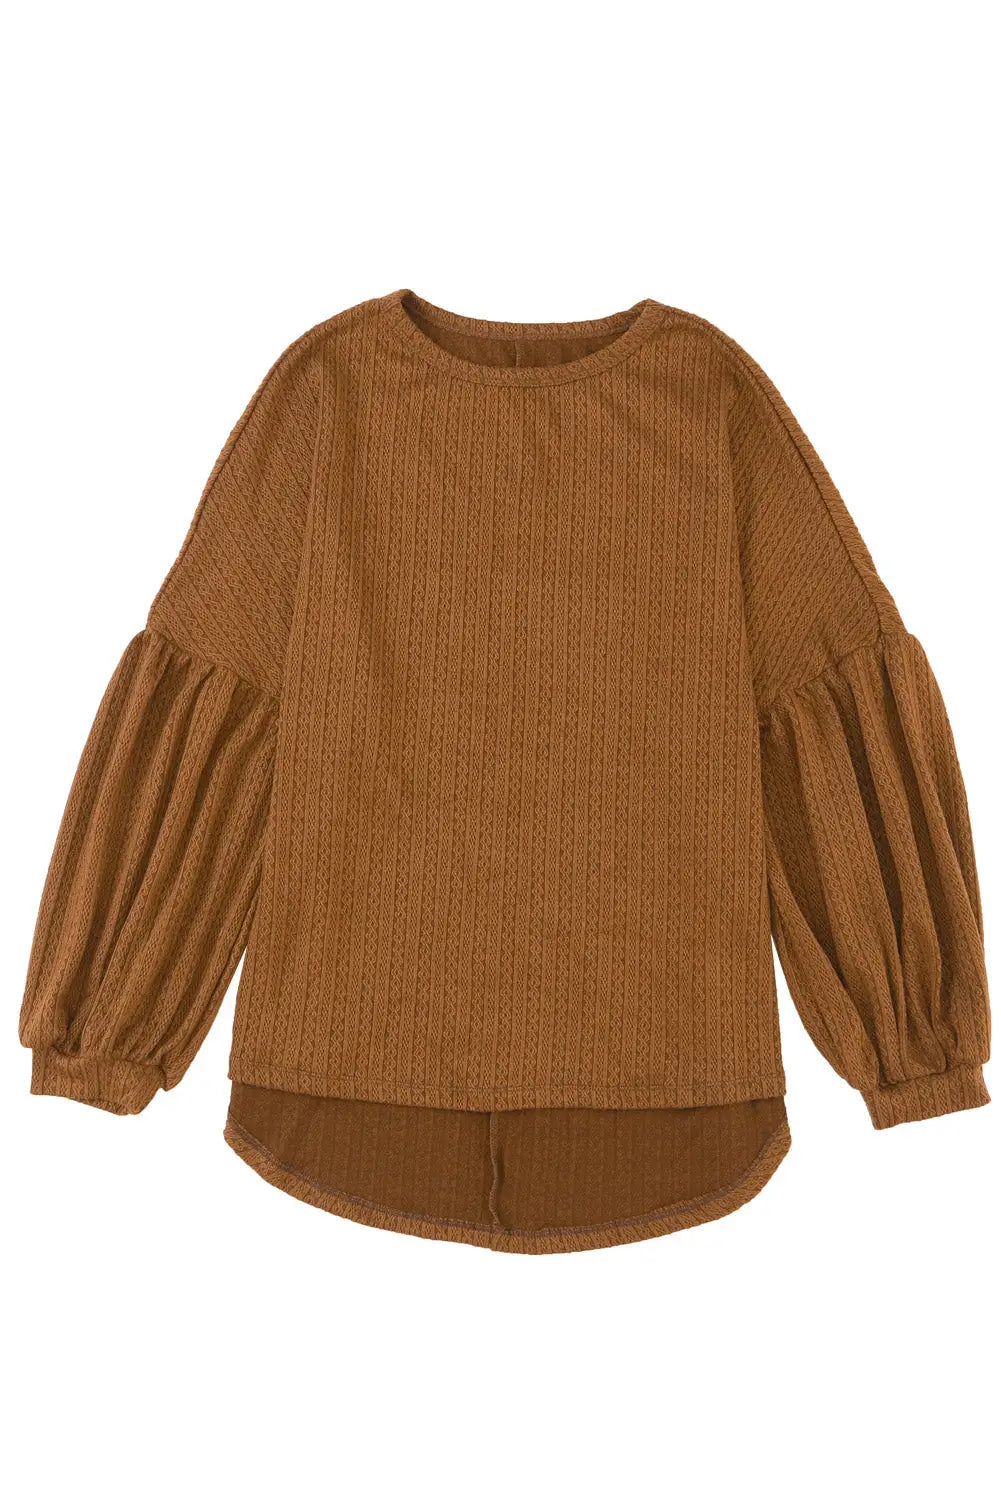 Faux Knit Jacquard Puffy Long Sleeve Top-14